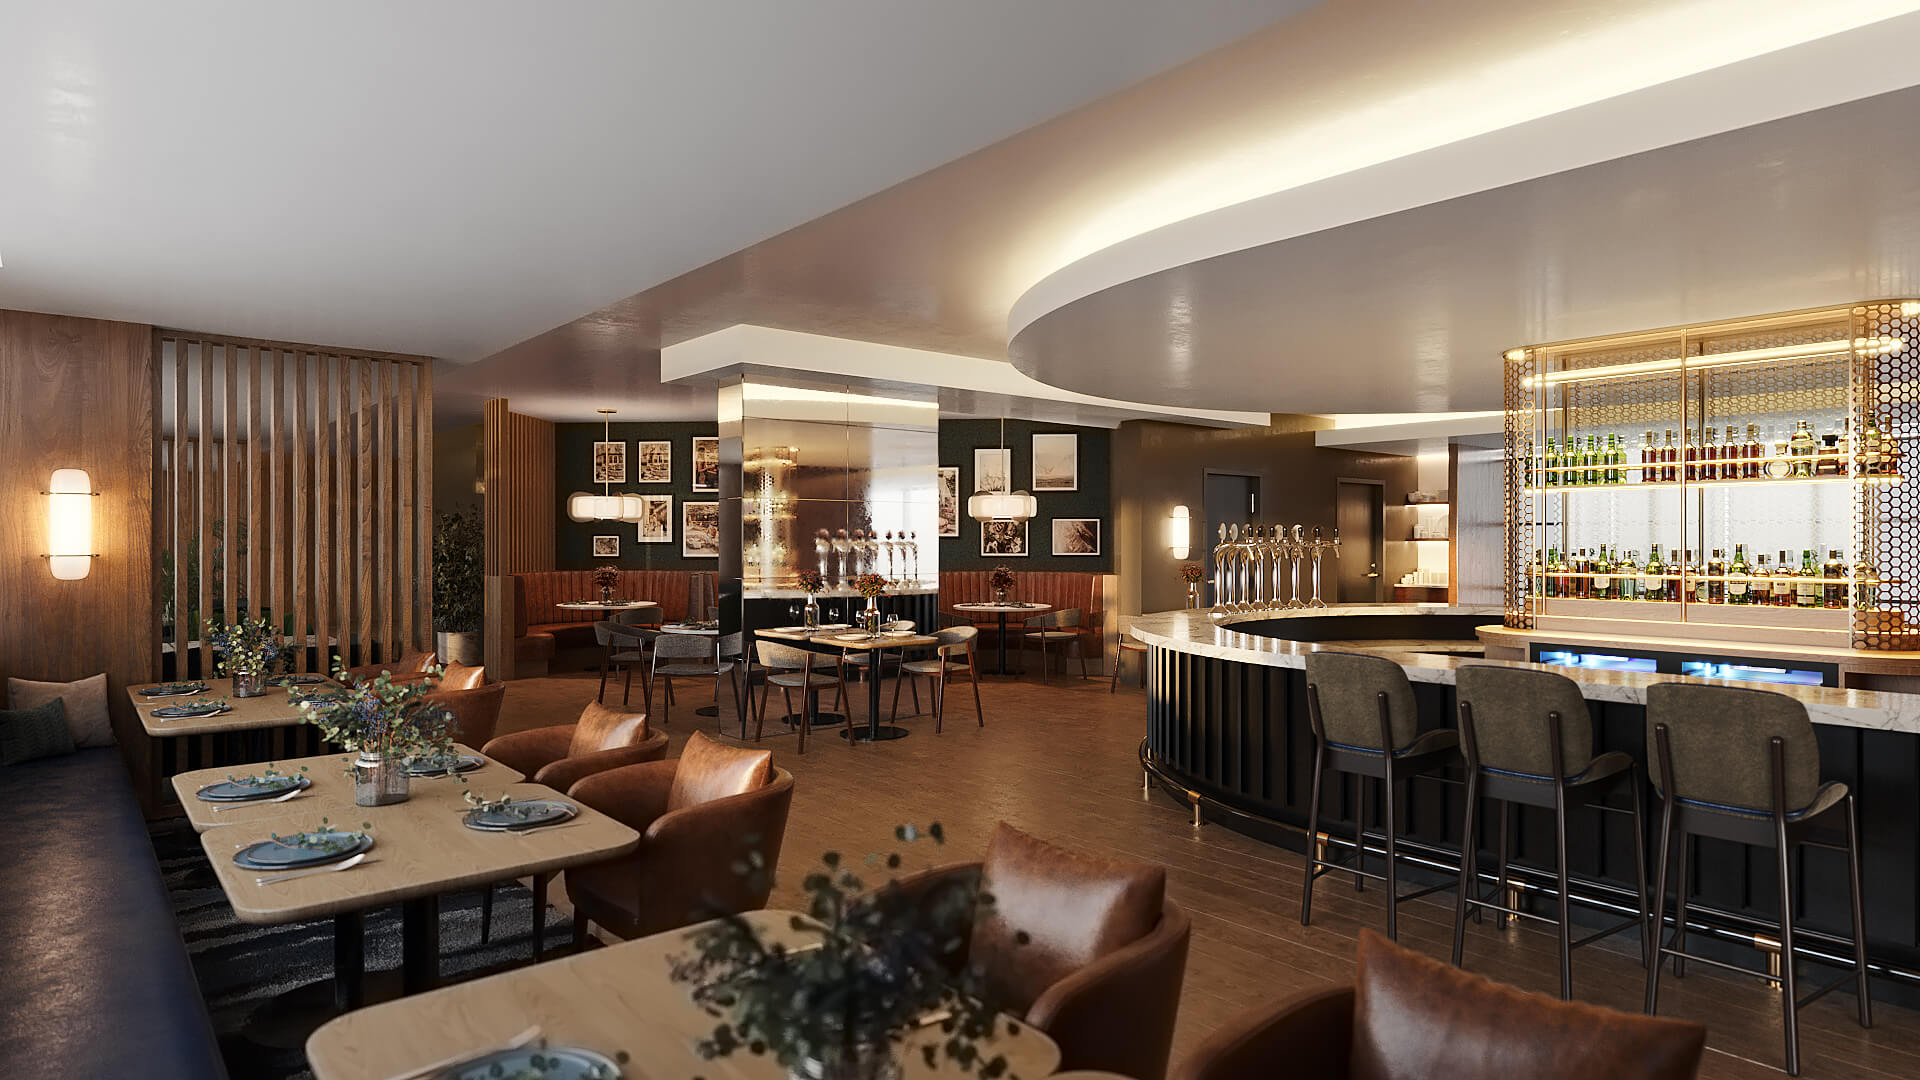 3D Rendering for a Cozy Restaurant Interior in London